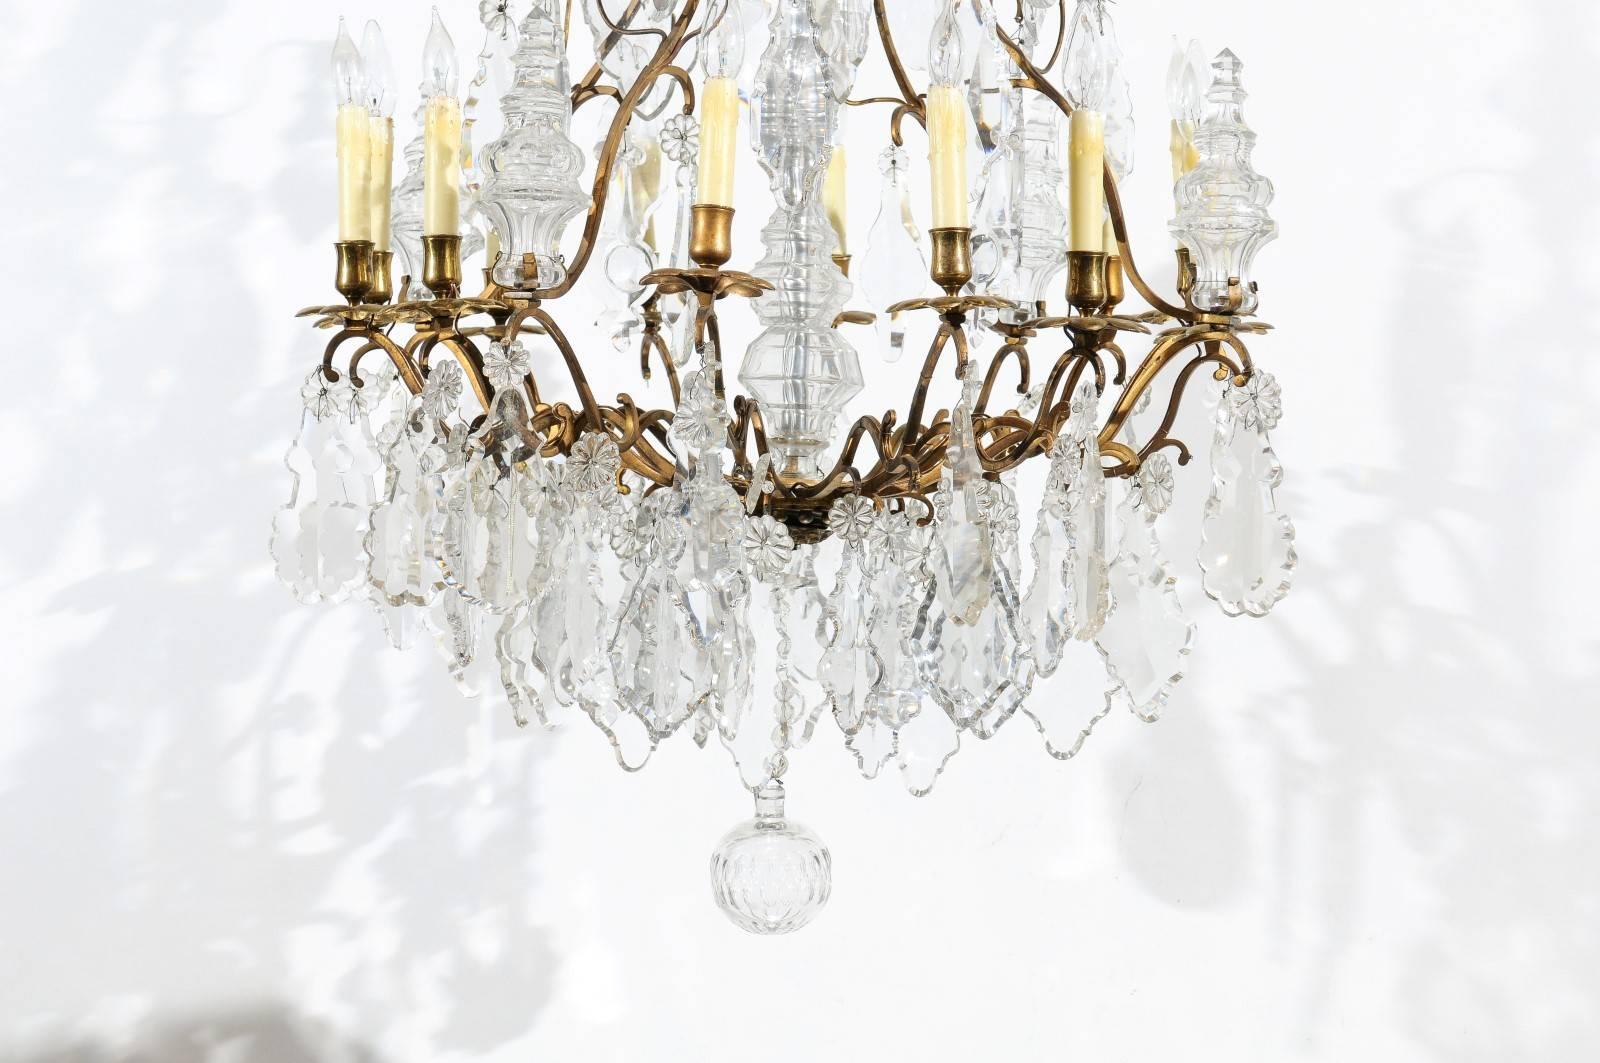 Crystal & Bronze Louis XV Style Chandelier with 12 Lights, 19th Century France For Sale 1